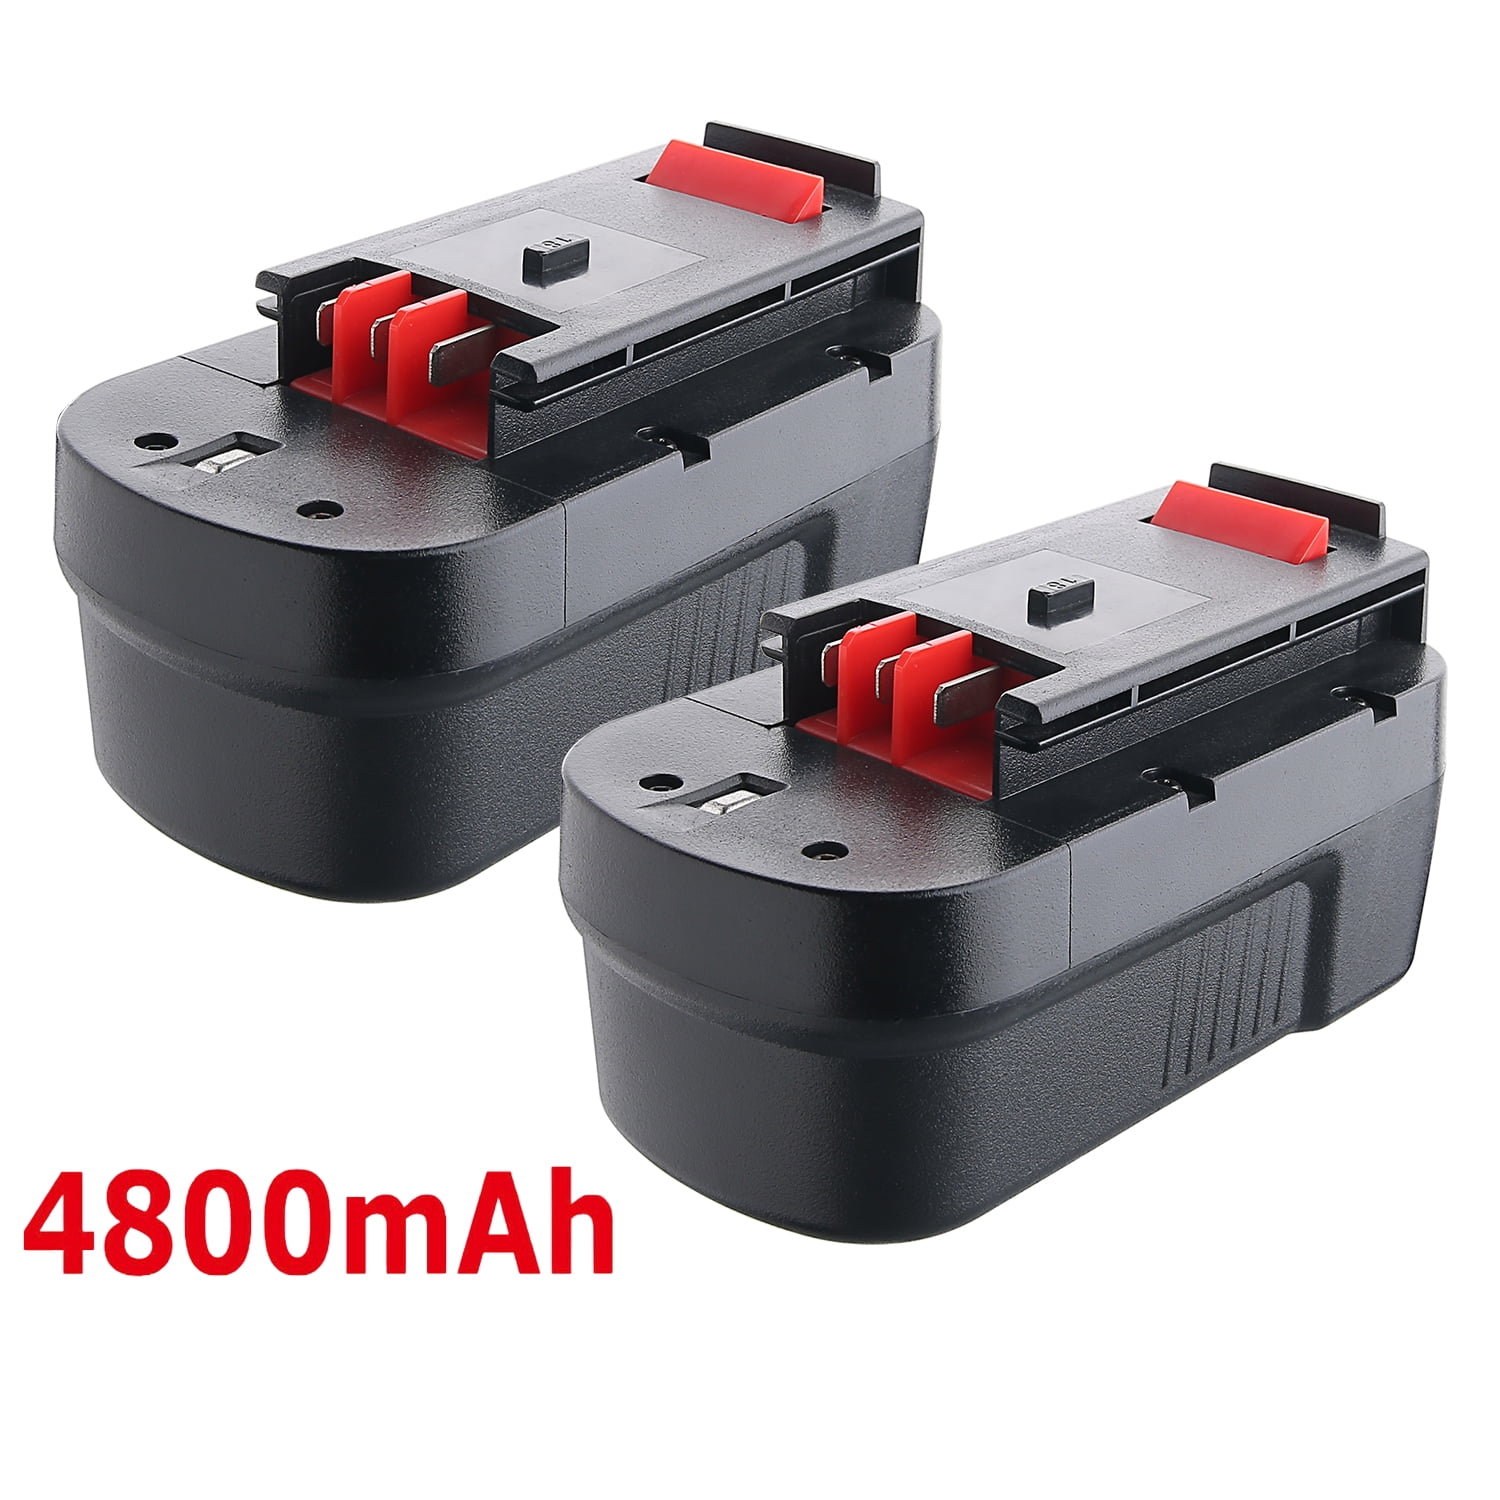 Powerextra 6.0Ah Replacement Lithium-Ion Battery for Black and Decker 18 Volts A1718 A18nh Hpb18 HPB18-OPE Cordless Tools